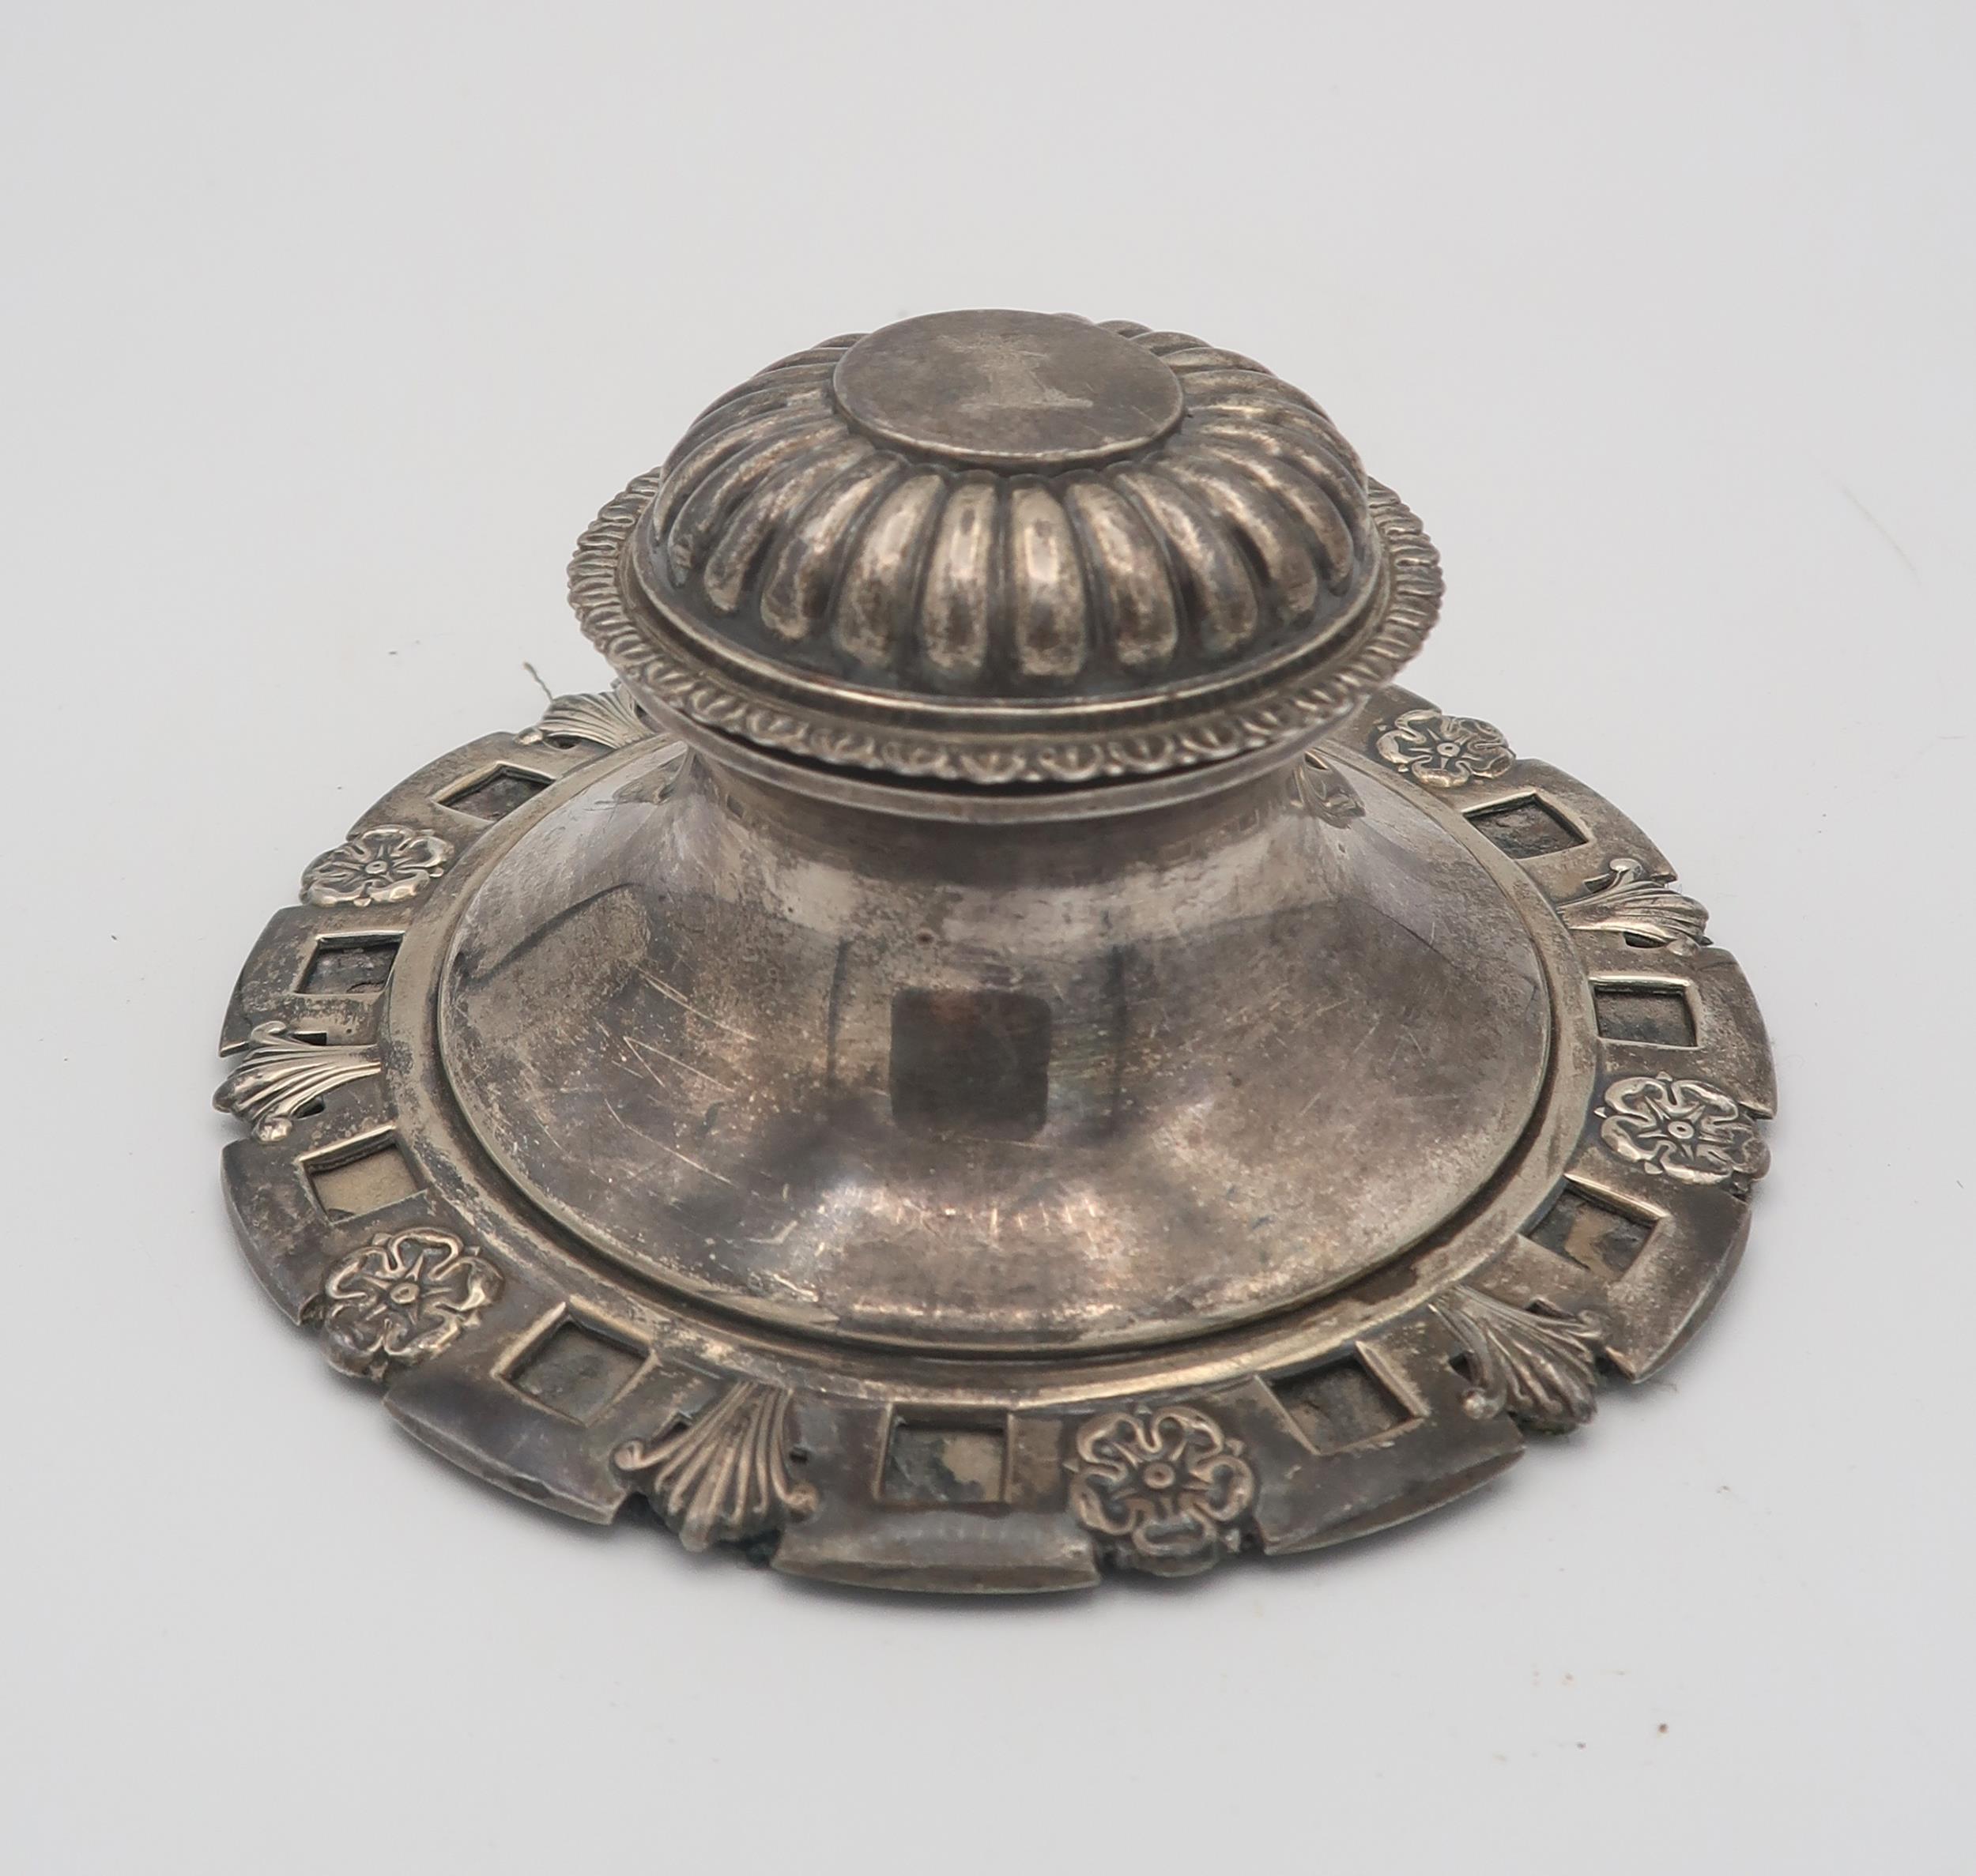 An Edwardian large silver capstan inkwell, the base decorated with cinquefoils and leaves, the lobed